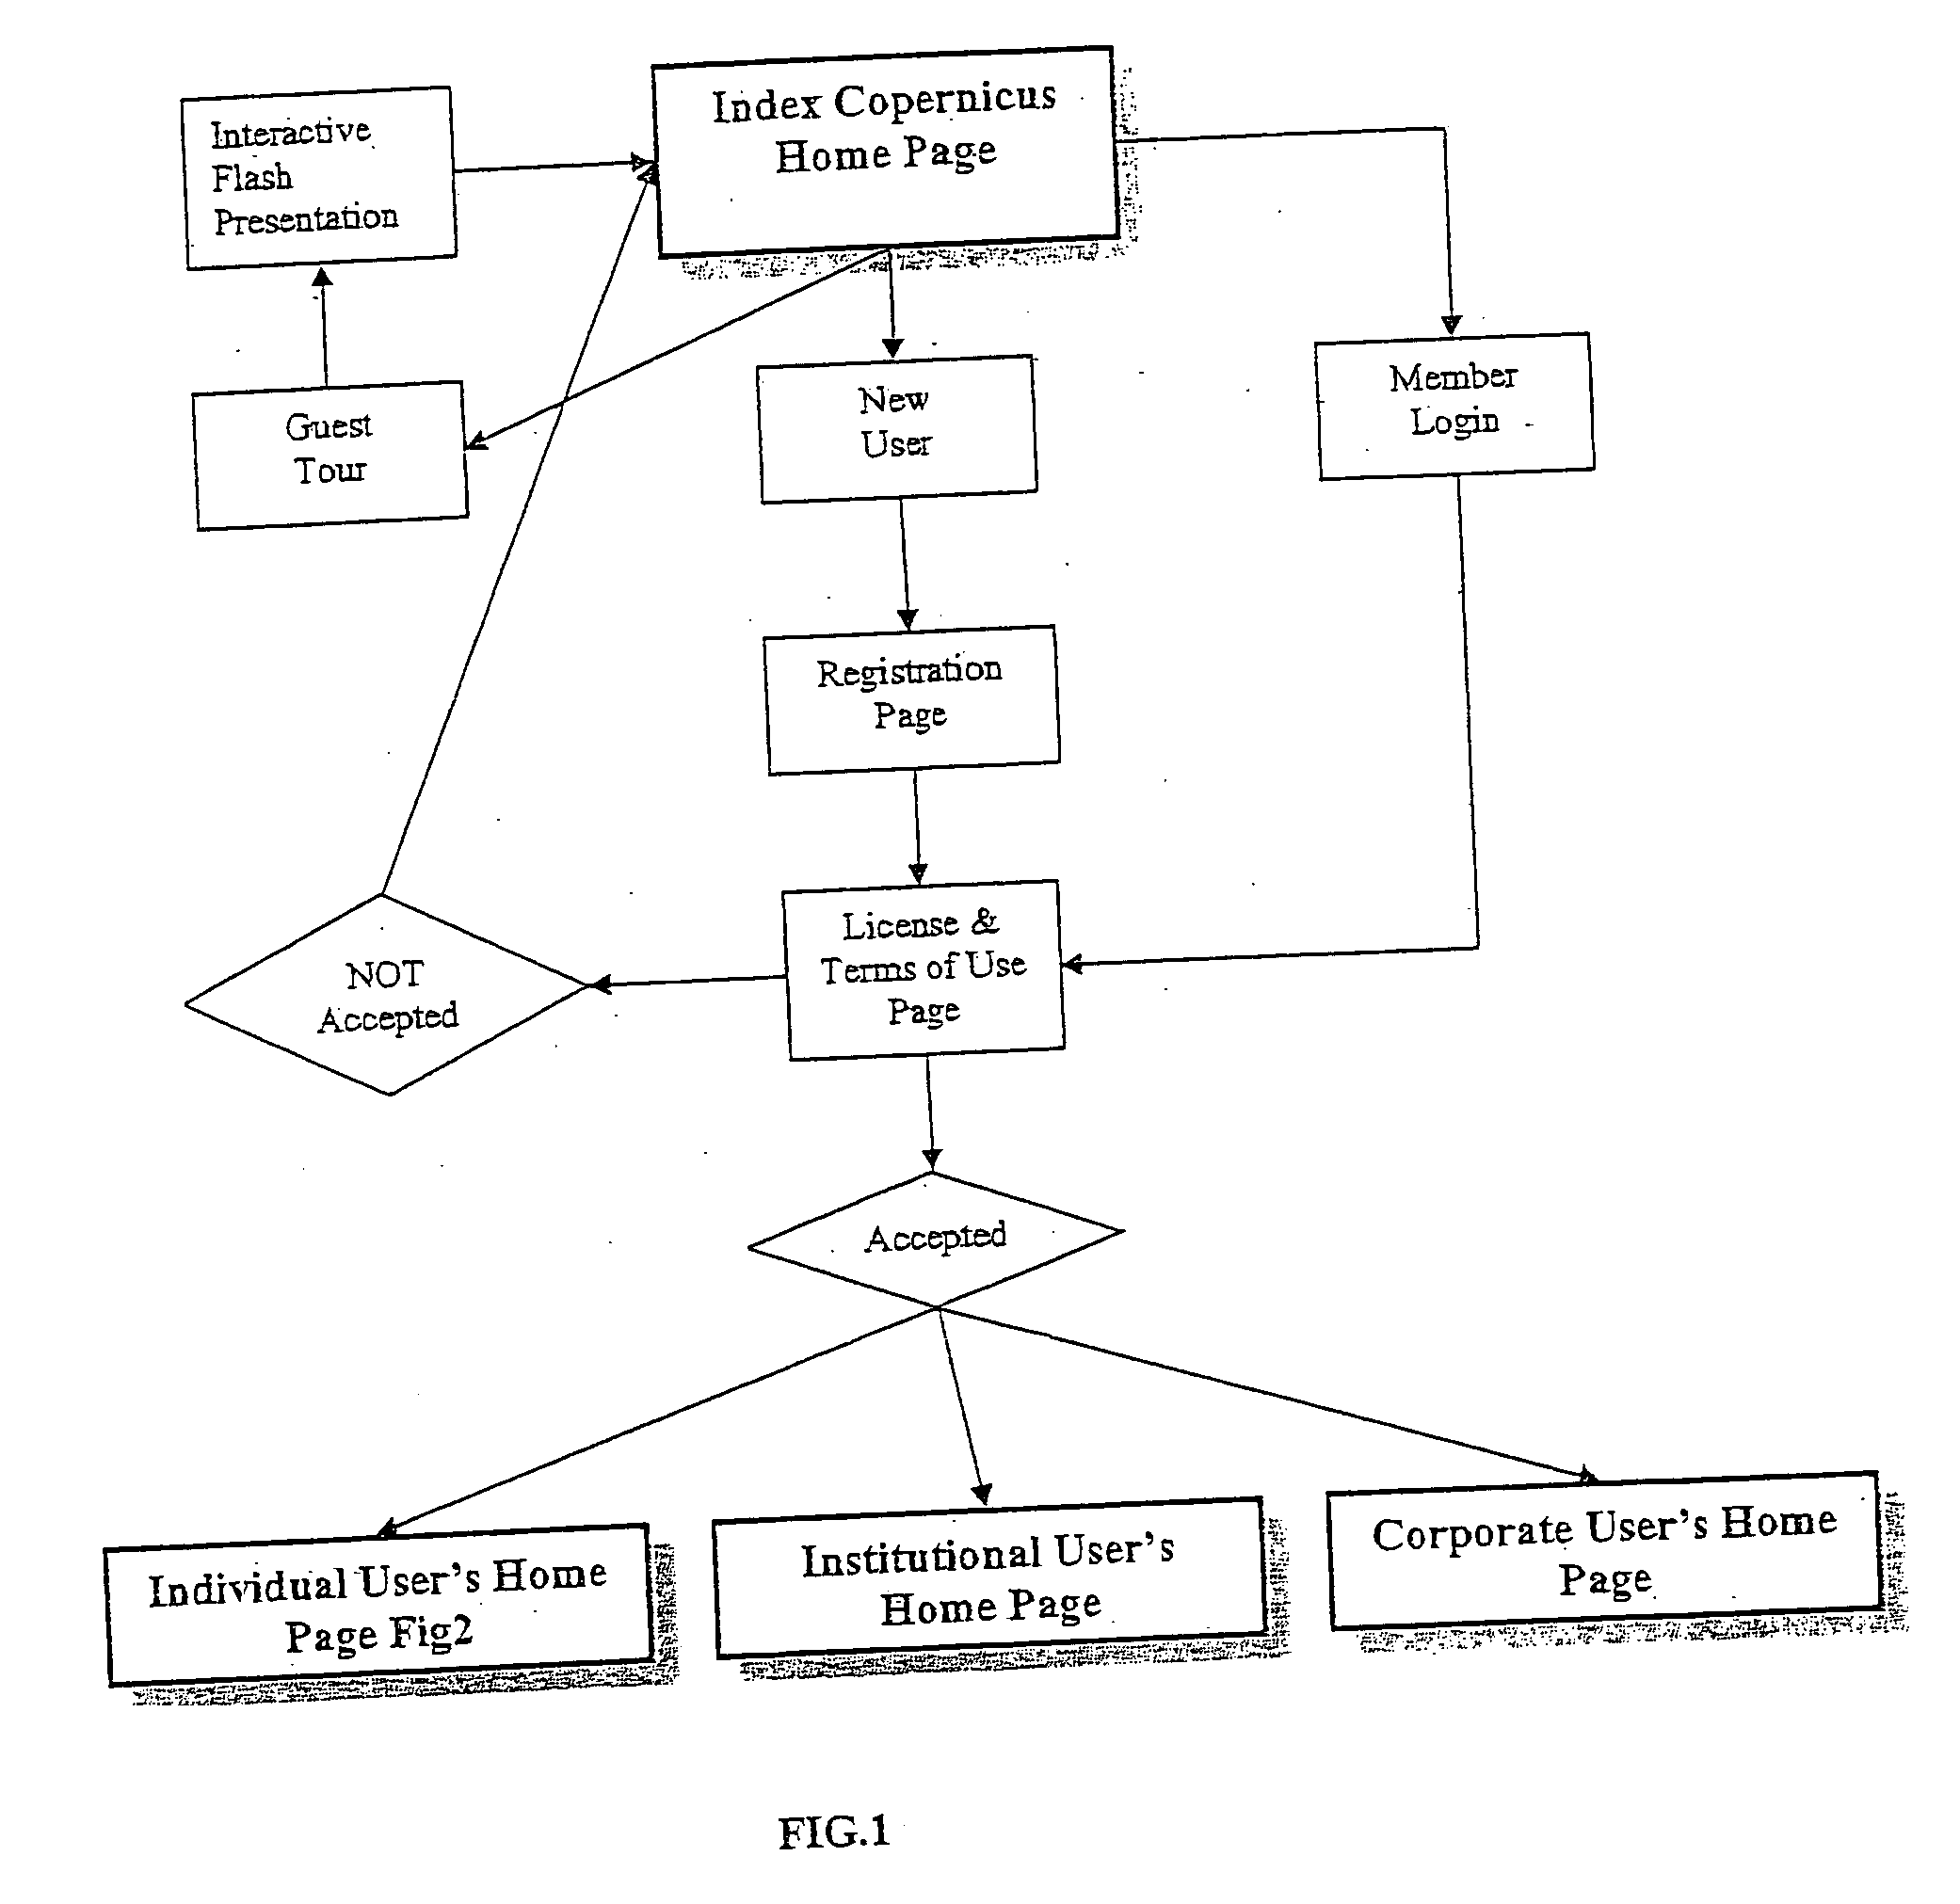 Computer system and method for evaluating scientific institutions, professional staff and work products